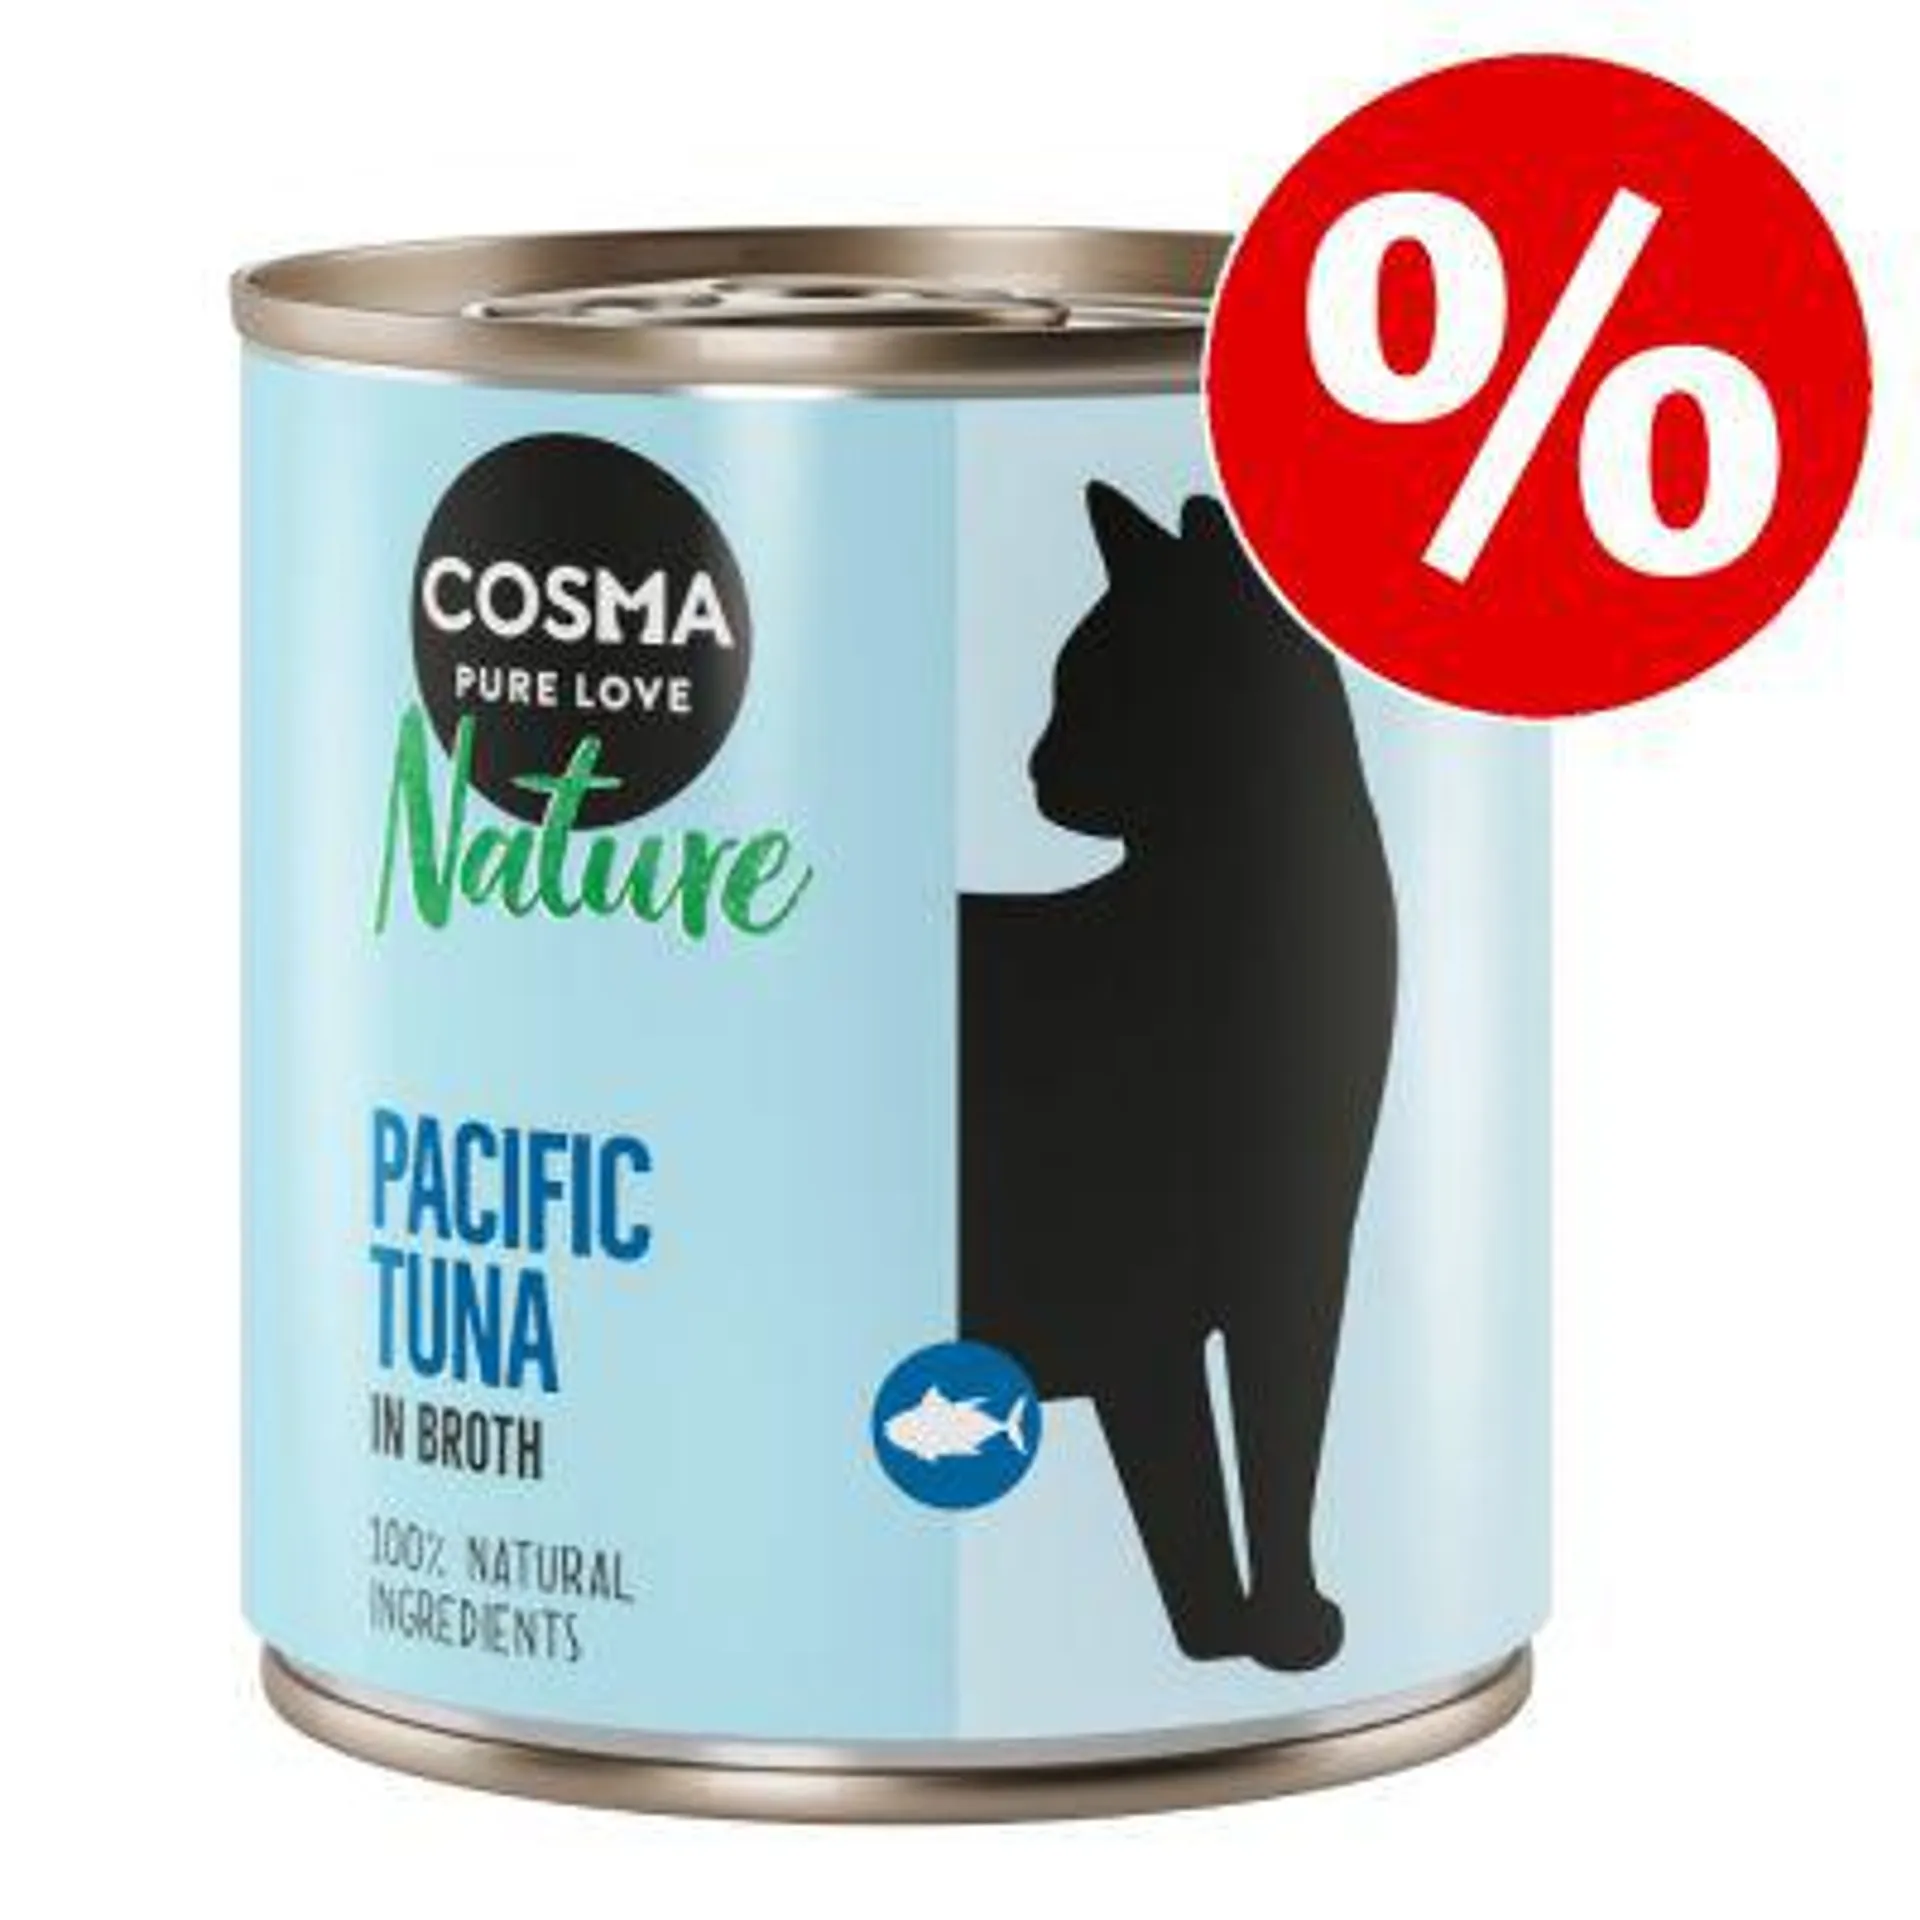 6 x 280g Cosma Nature Wet Cat Food - Special Price!*